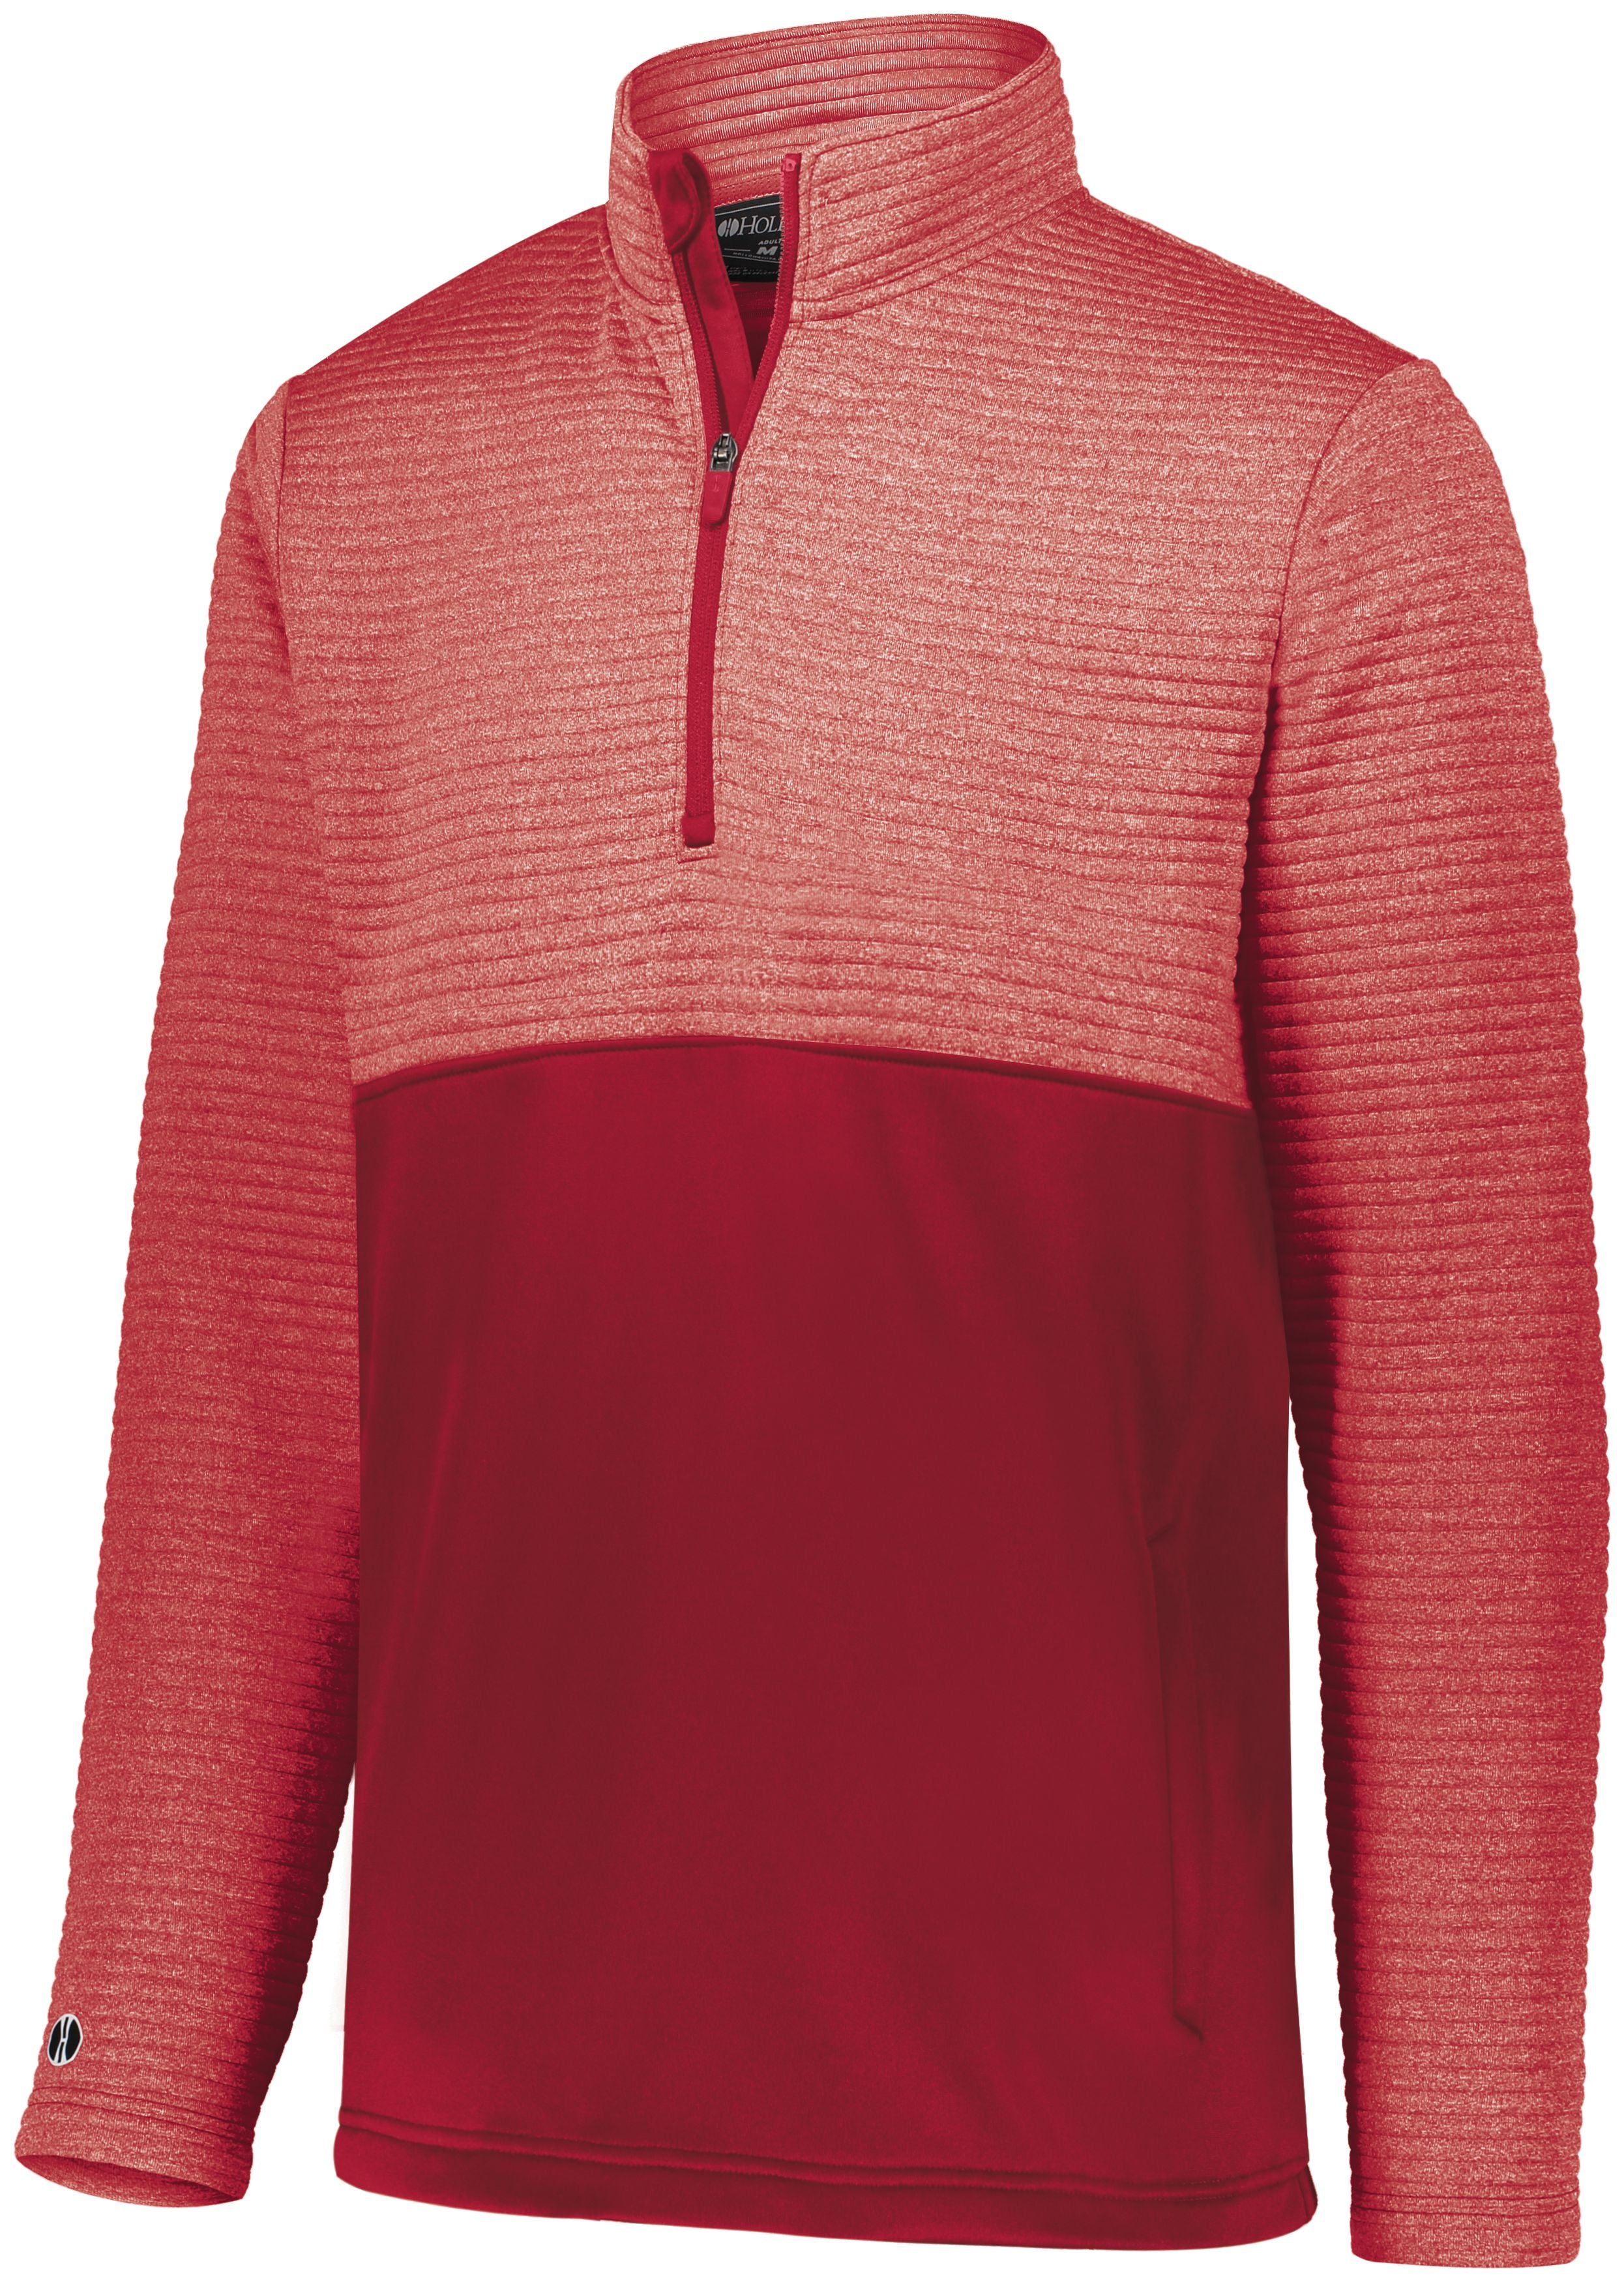 Holloway 3D Regulate Pullover in Scarlet Heather/Scarlet  -Part of the Adult, Adult-Pullover, Holloway, Outerwear, 3D-Collection product lines at KanaleyCreations.com